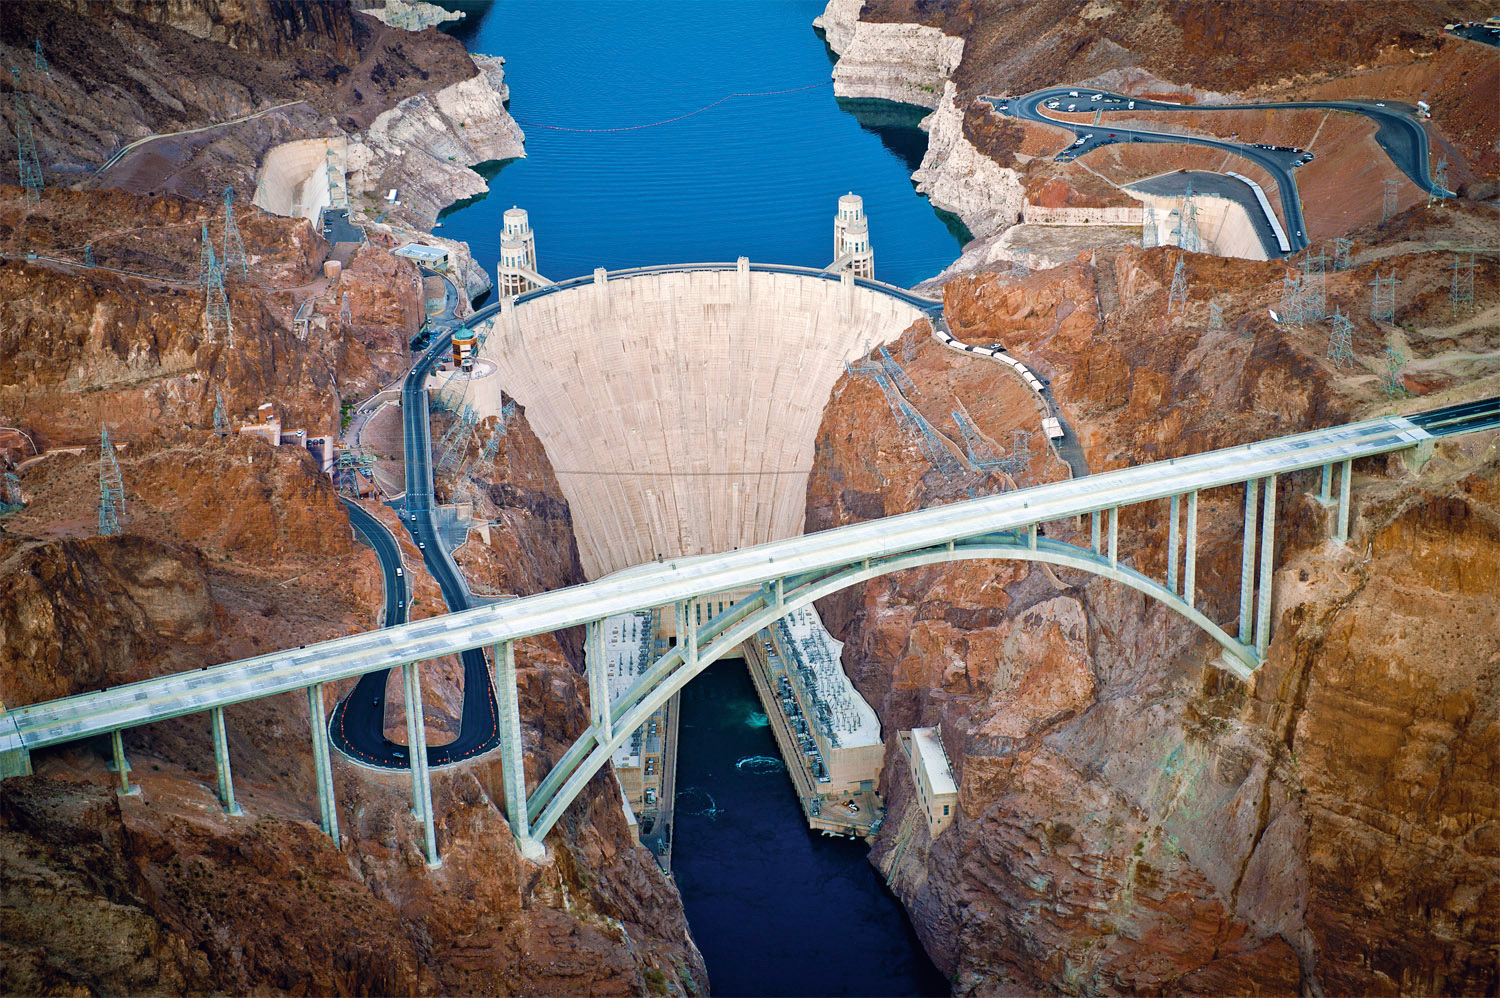 Aerial view of the Hoover Dam